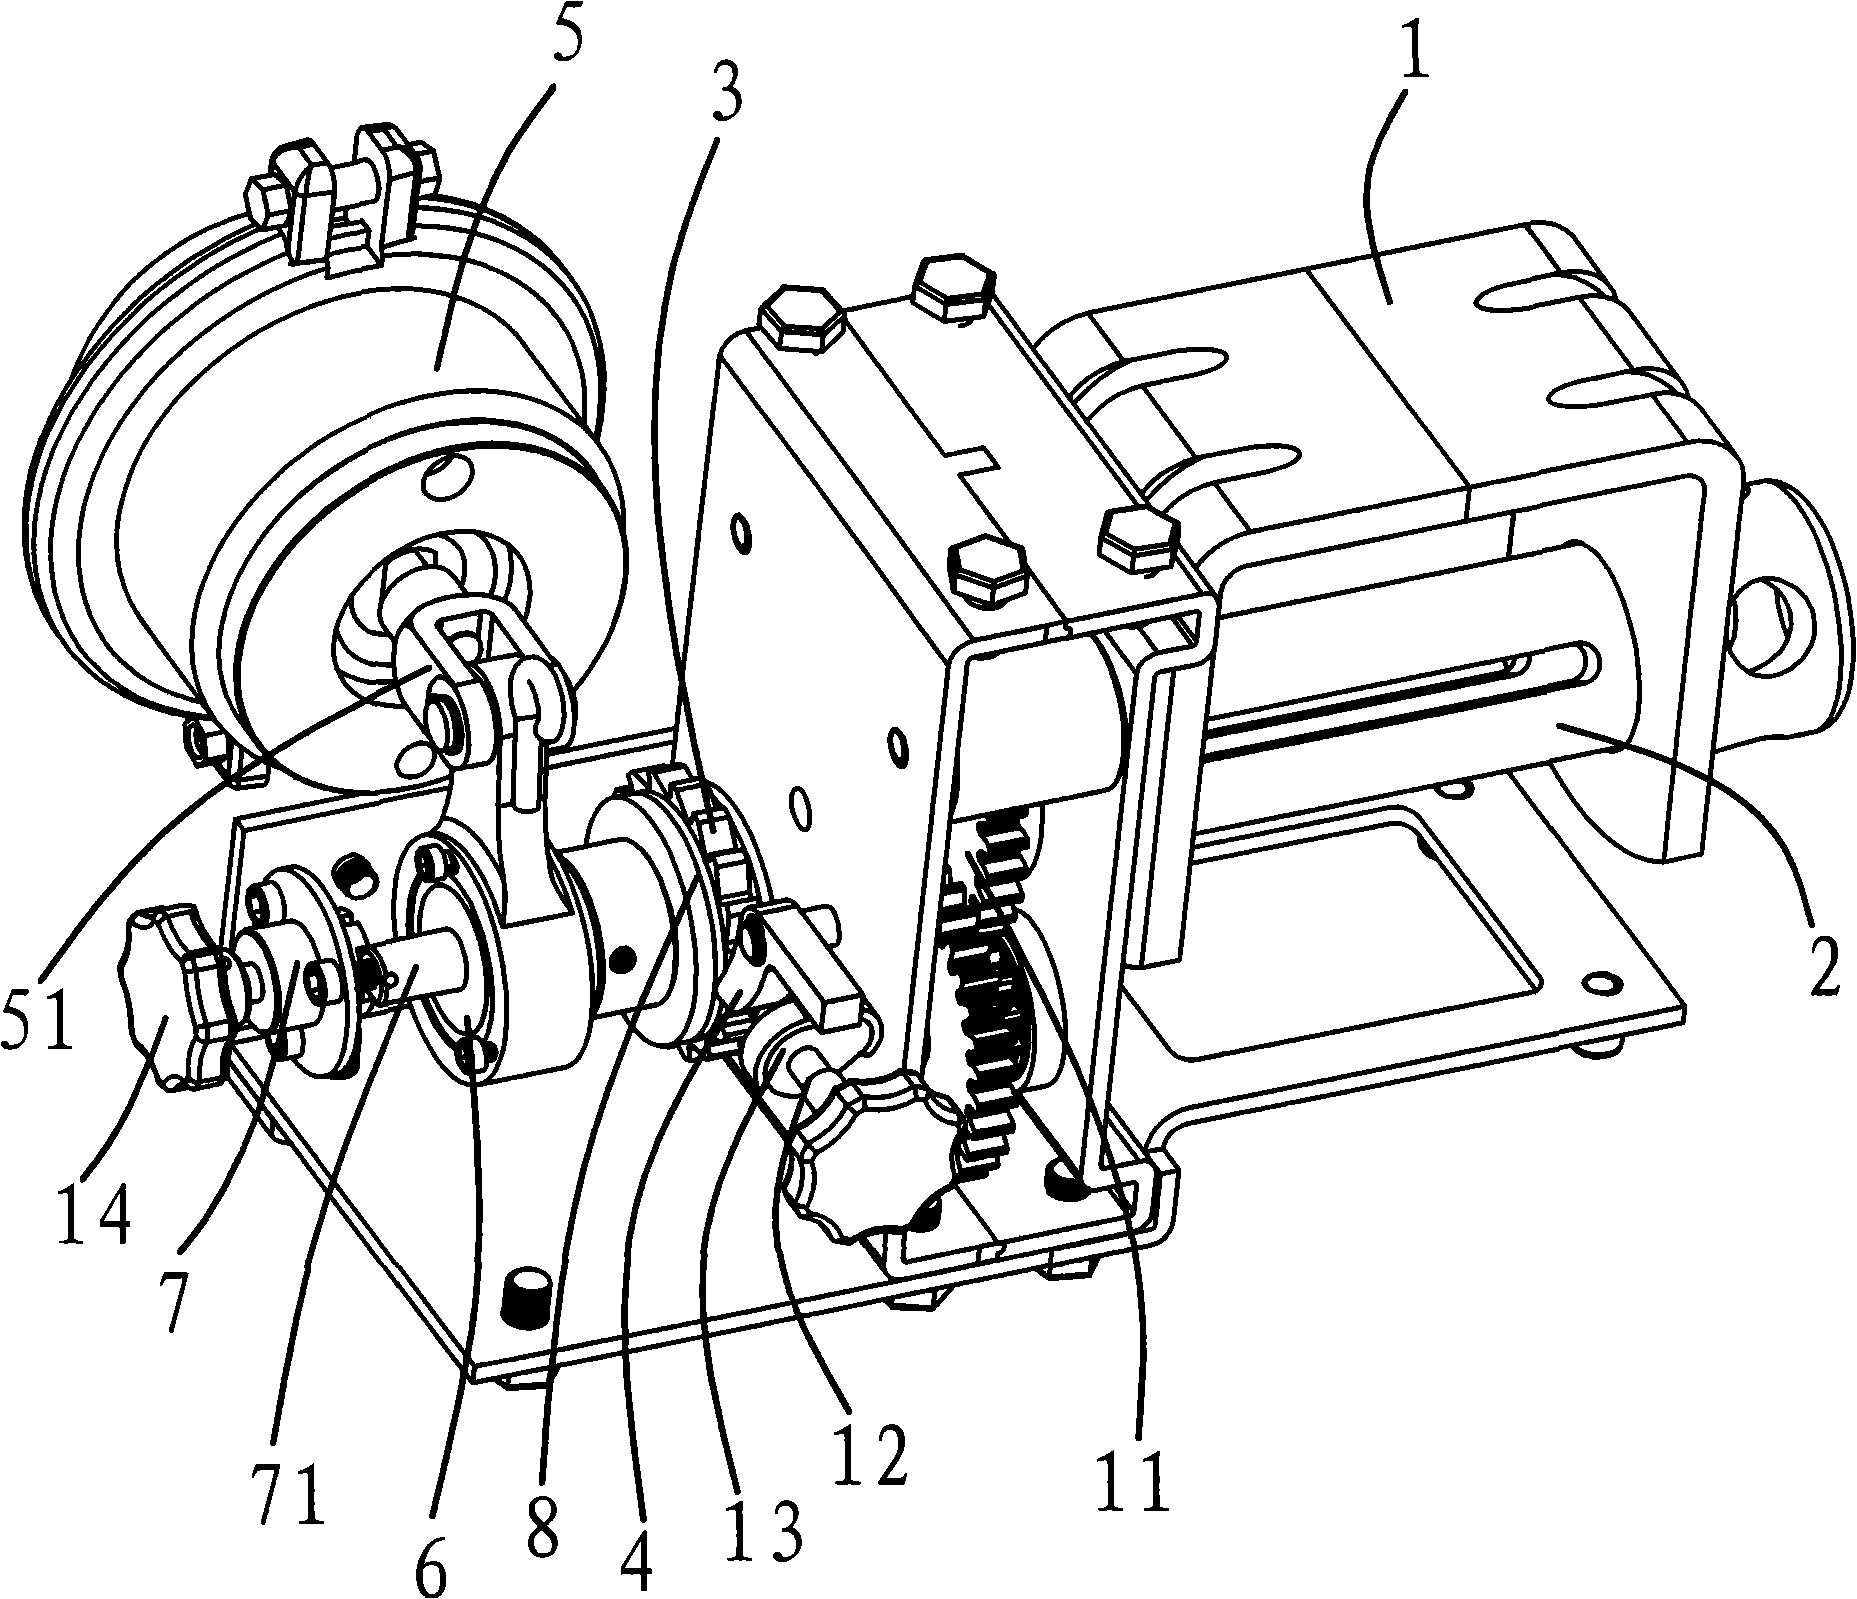 Automatic winding and unwinding device for winch